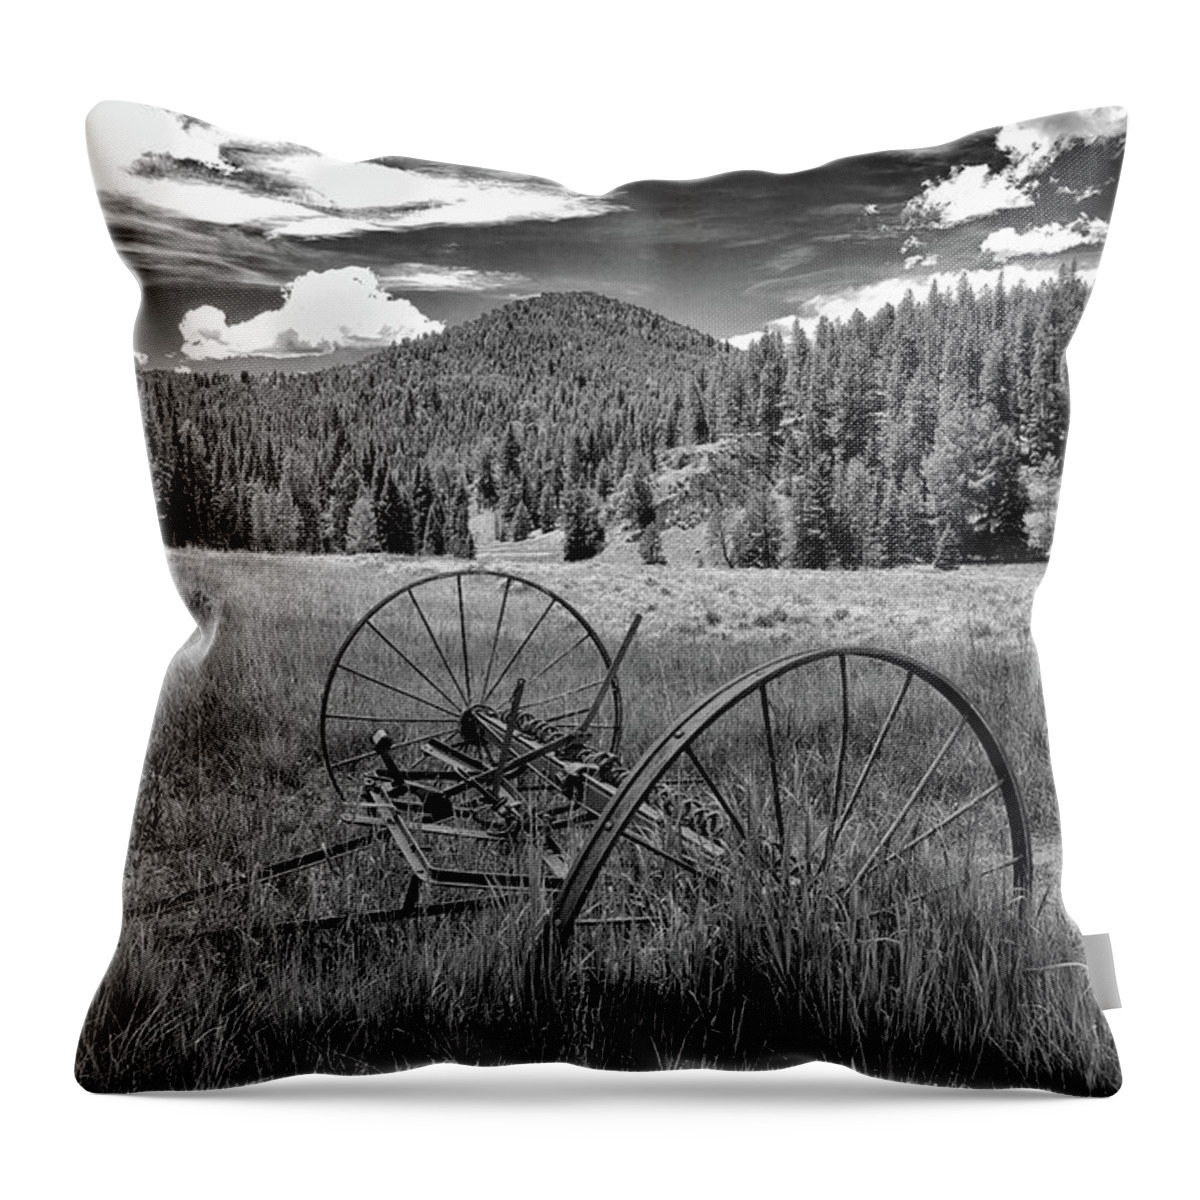 Black And White Throw Pillow featuring the photograph Old Machinery by Bob Falcone